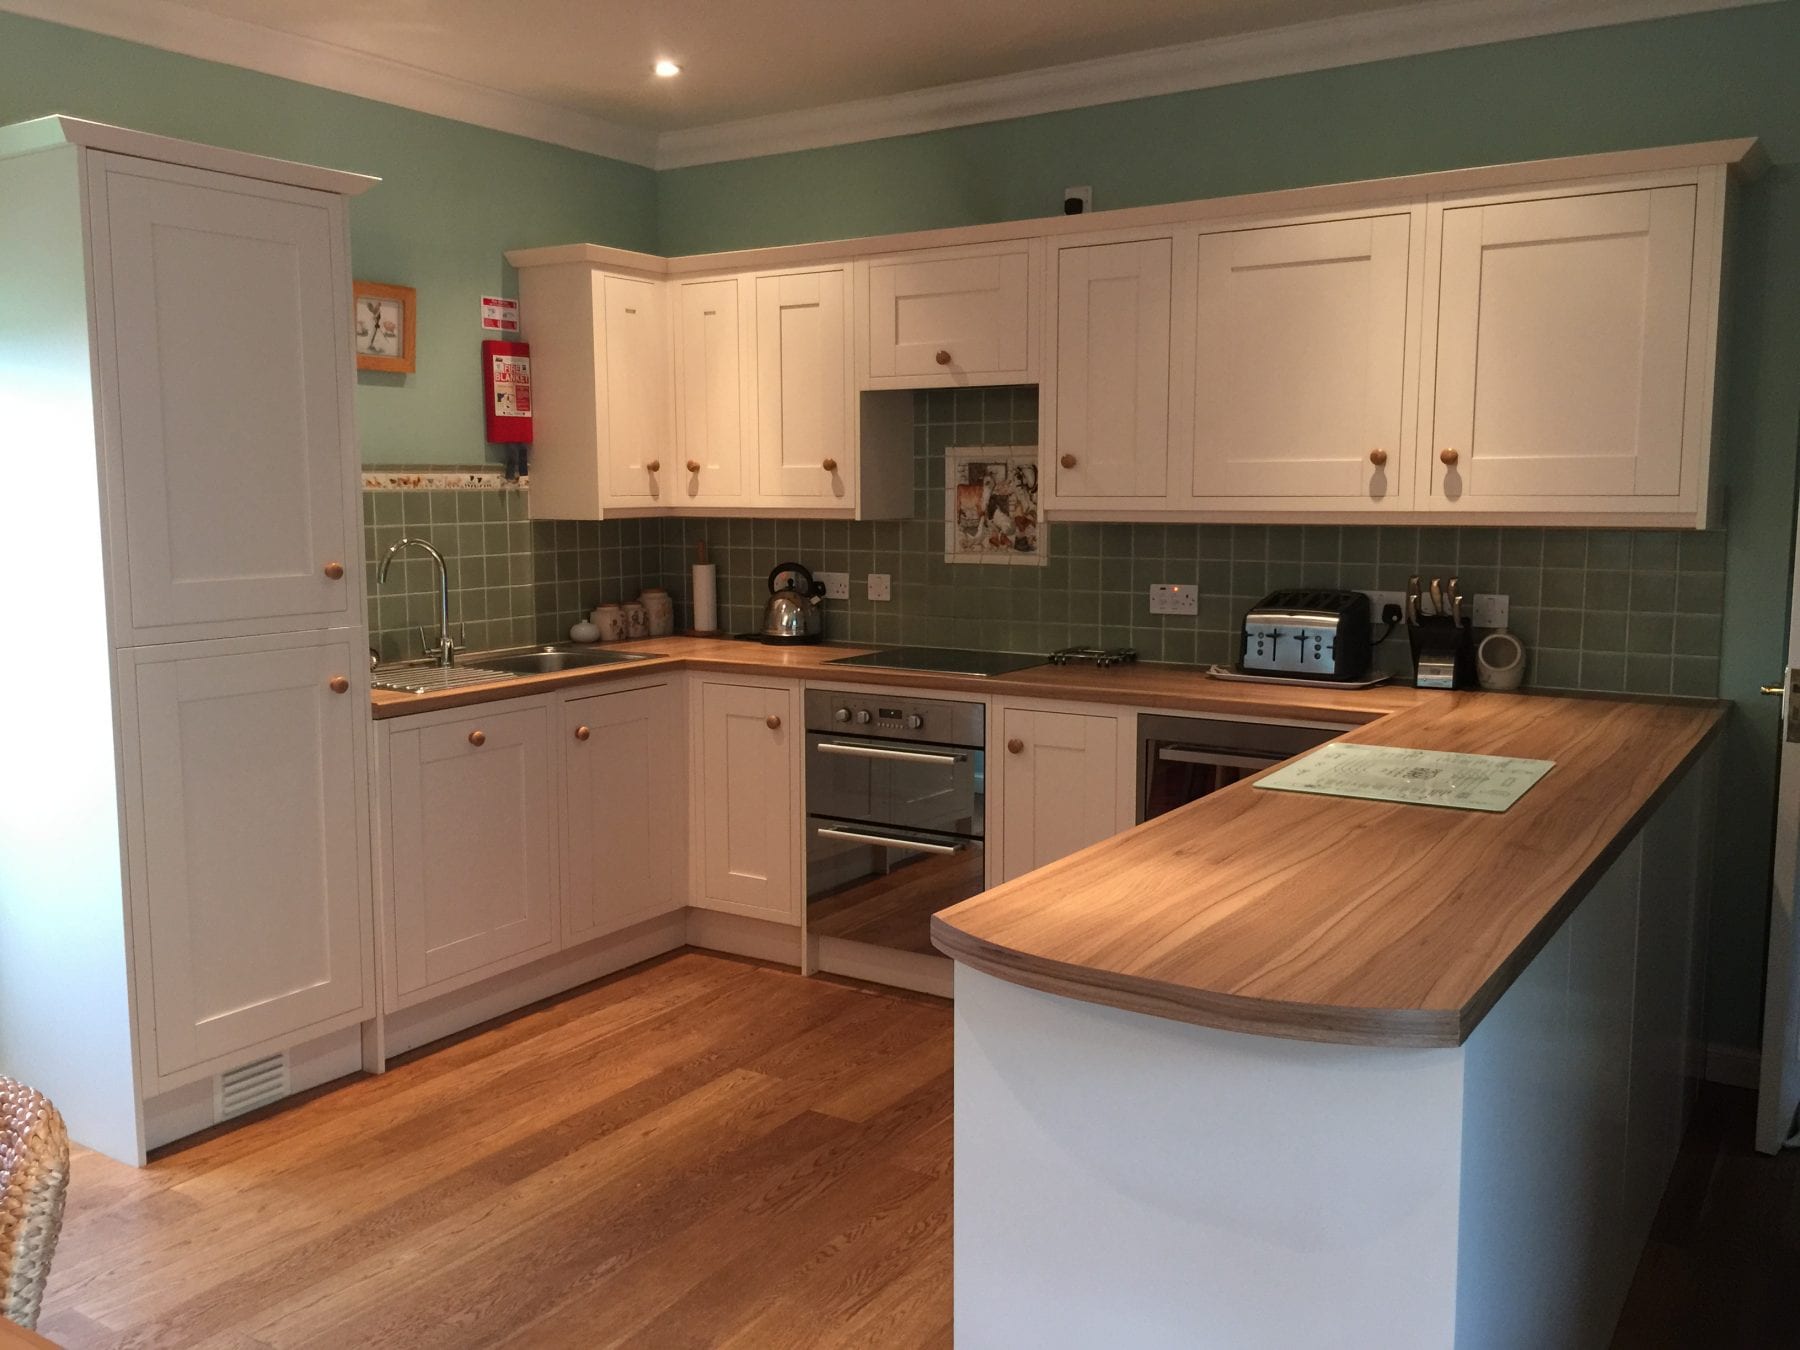 The Steadings kitchen